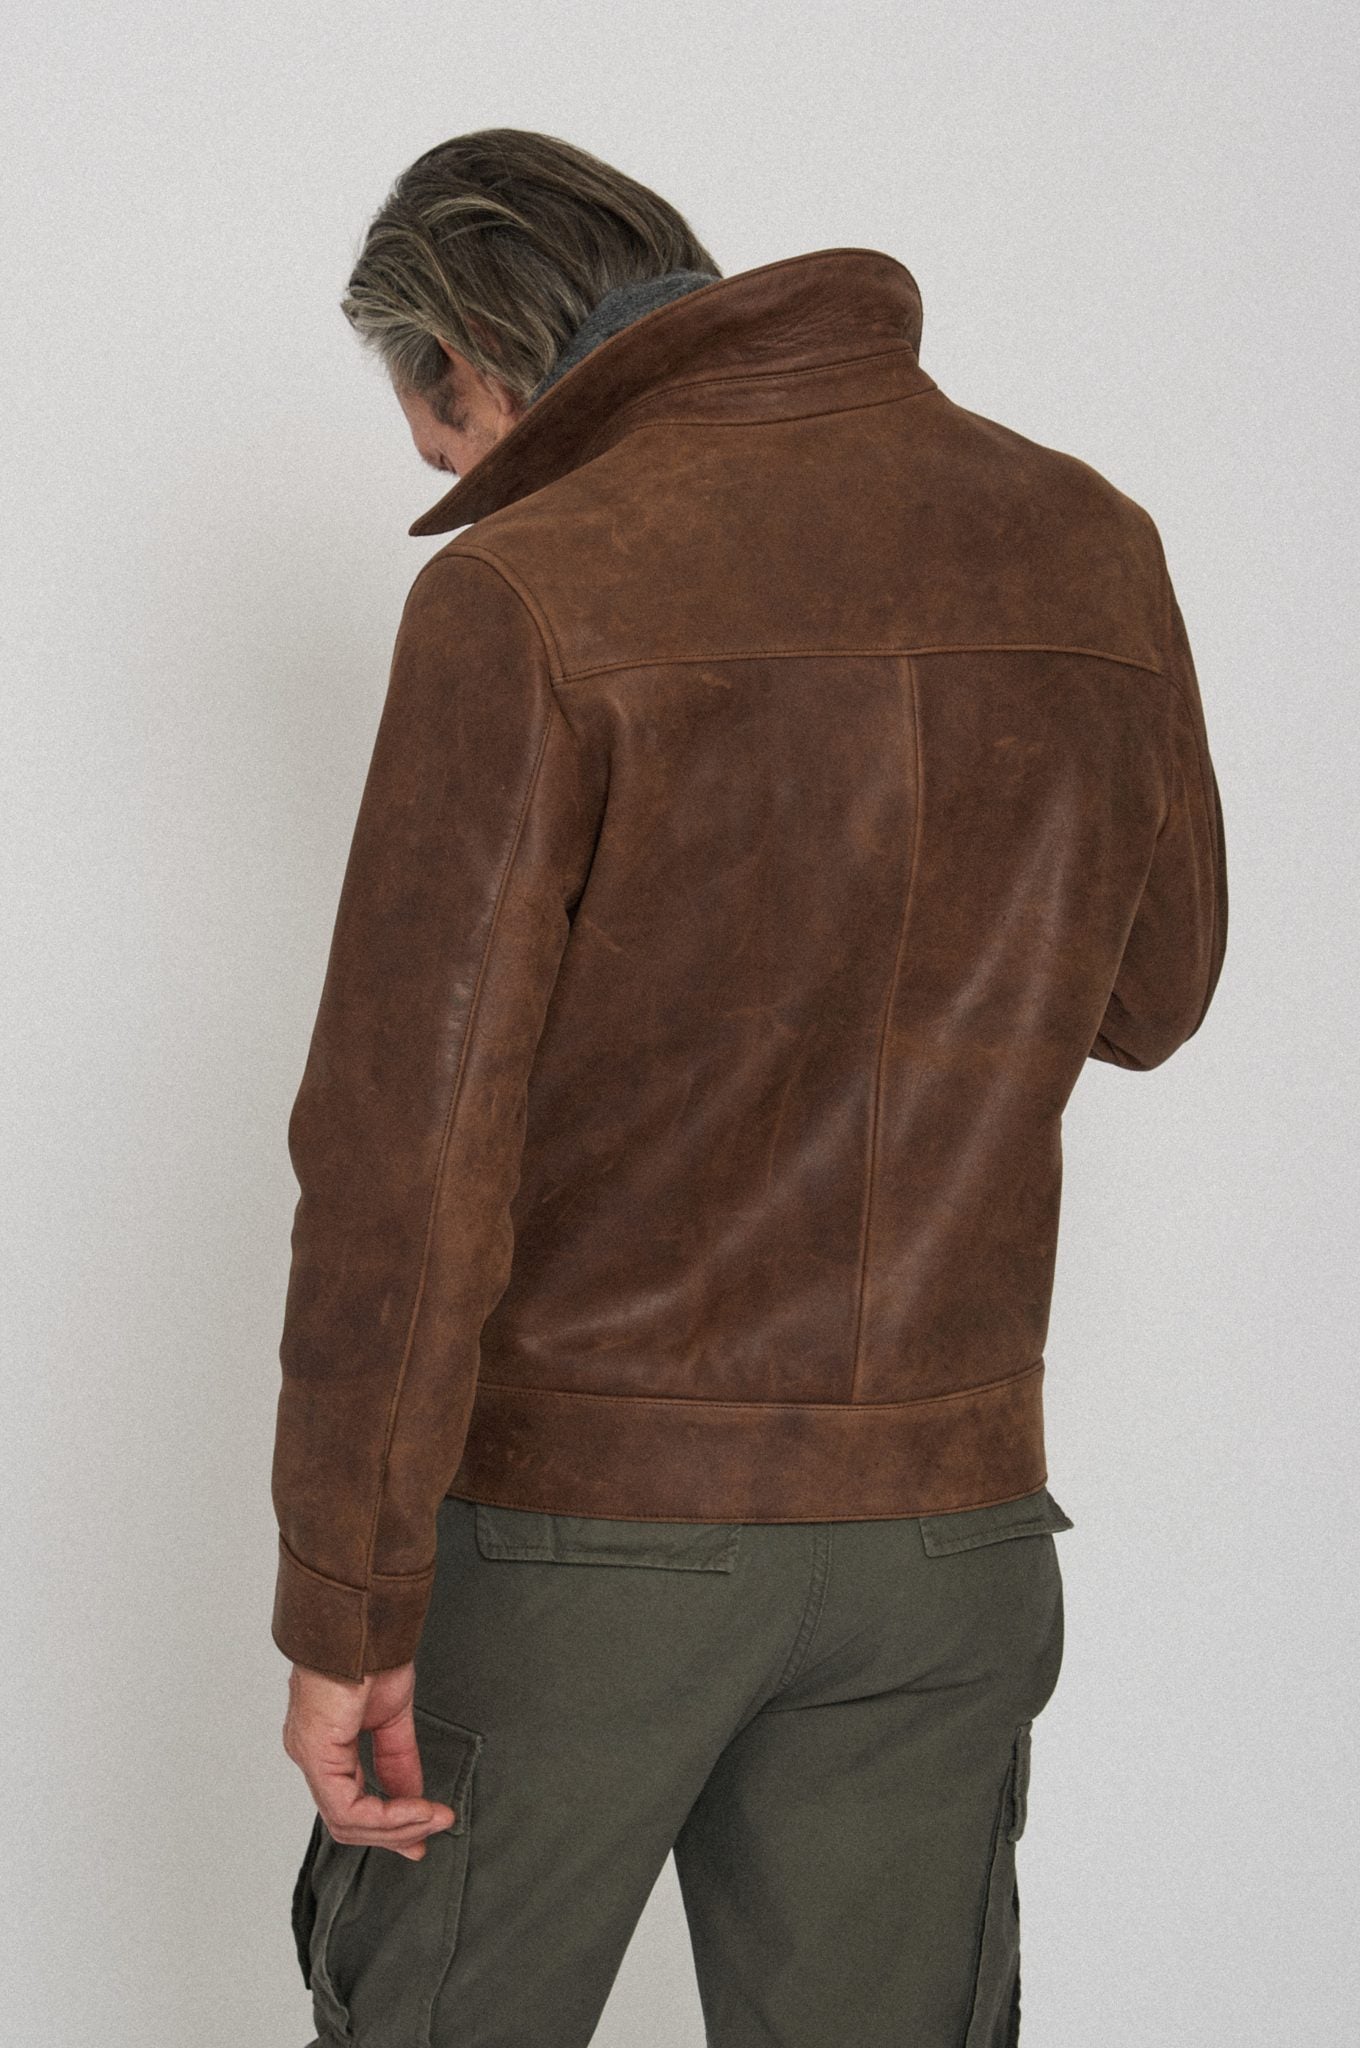 Men's Rugged and Characterful Premium Leather Jacket